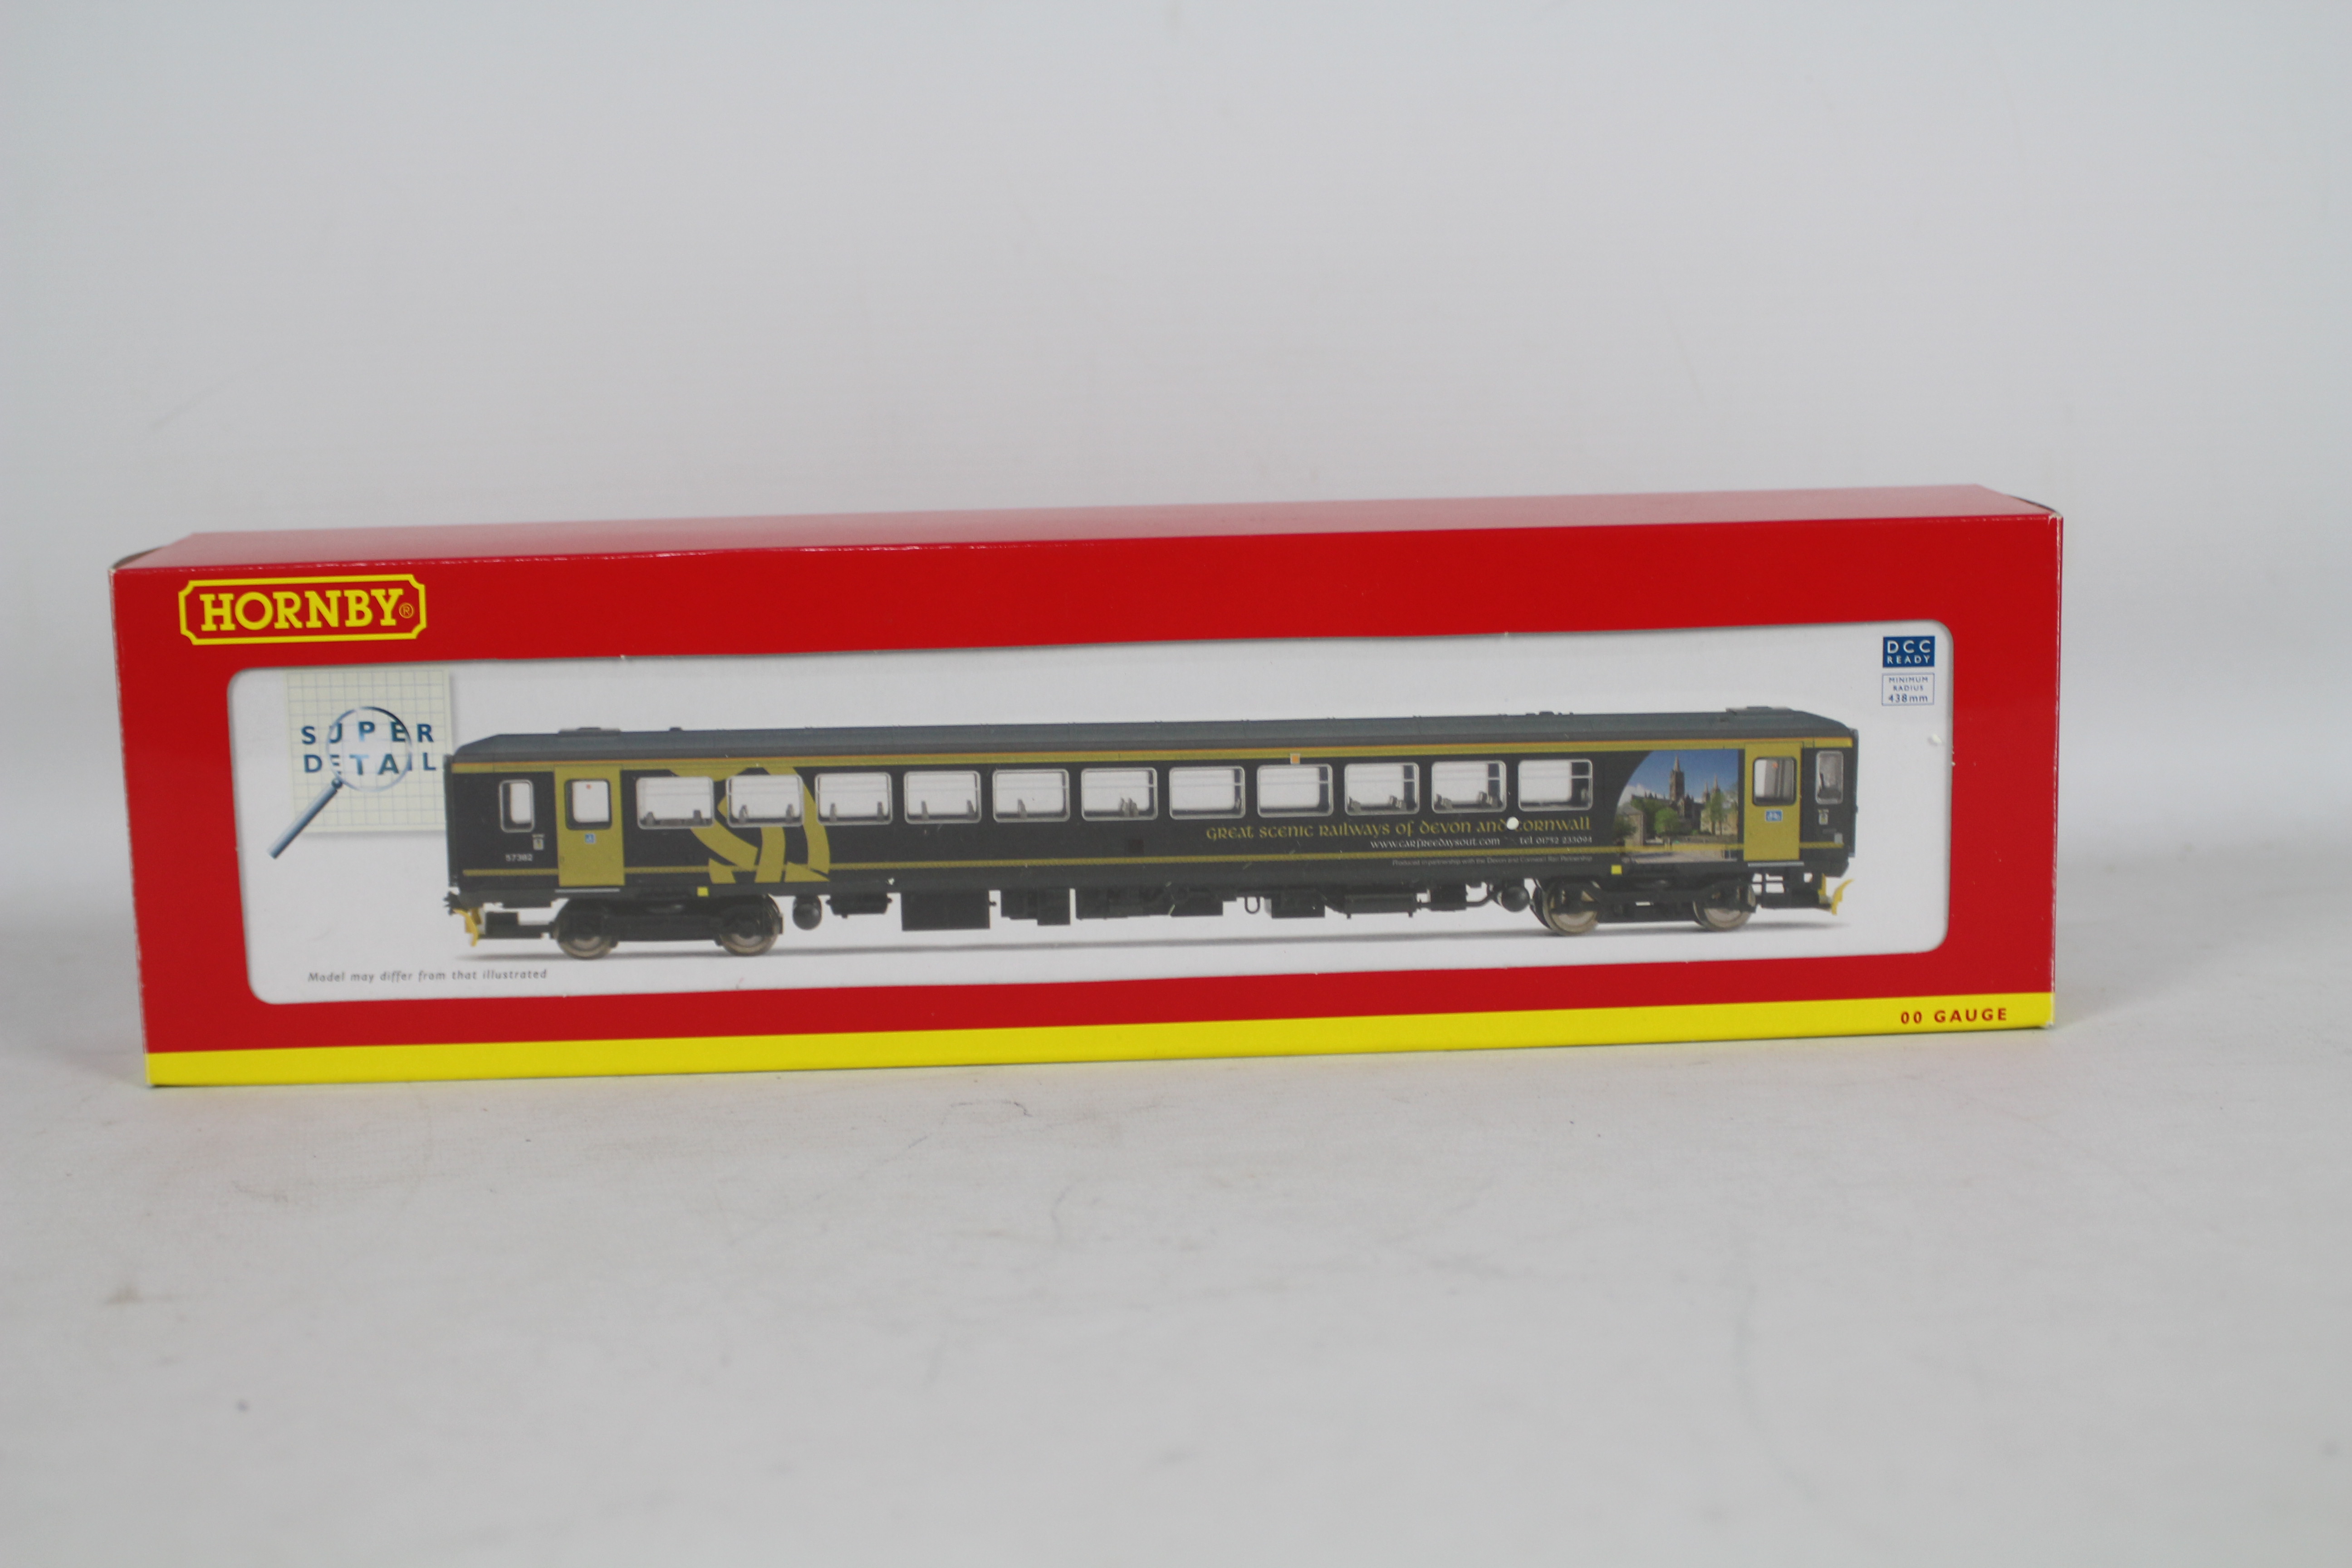 Hornby - A boxed DCC READY Hornby 'Super Detail' R2866 Wessex Trains Class 153 DMU OP.No. '153382'. - Image 2 of 2